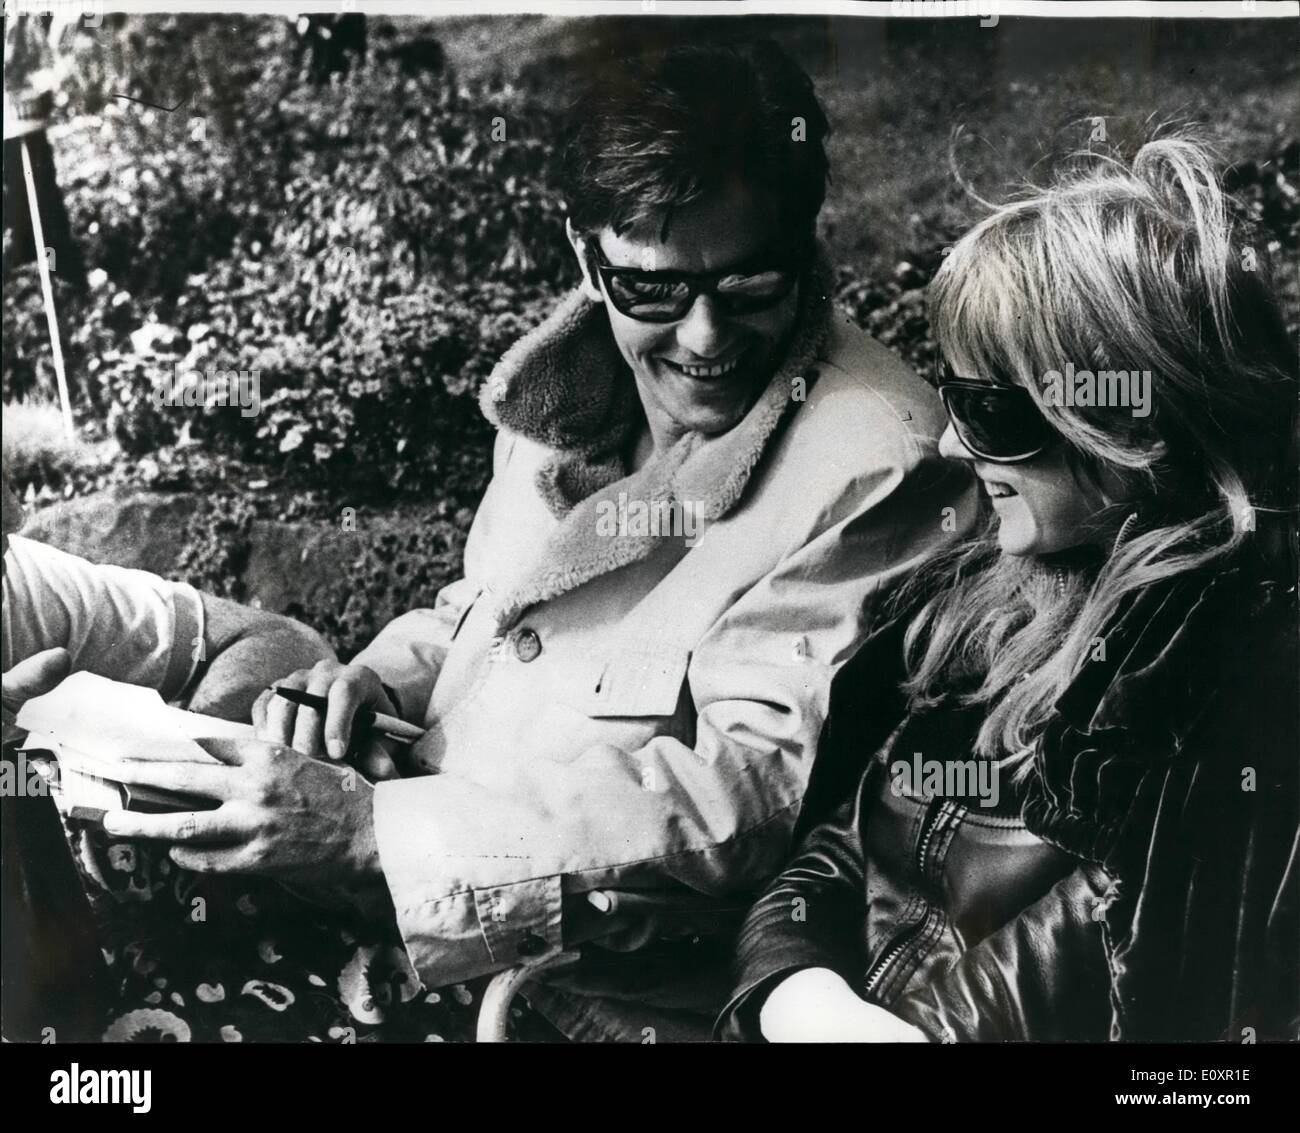 Oct. 10, 1967 - Marianne faithfull making her first film: Marianne Faithfull and co-star Alain Delon, pictured in scene from Marianne's first film The Motorcycle, currently being made in Heidelberg. The film is directed by Jack Cardiff. Stock Photo